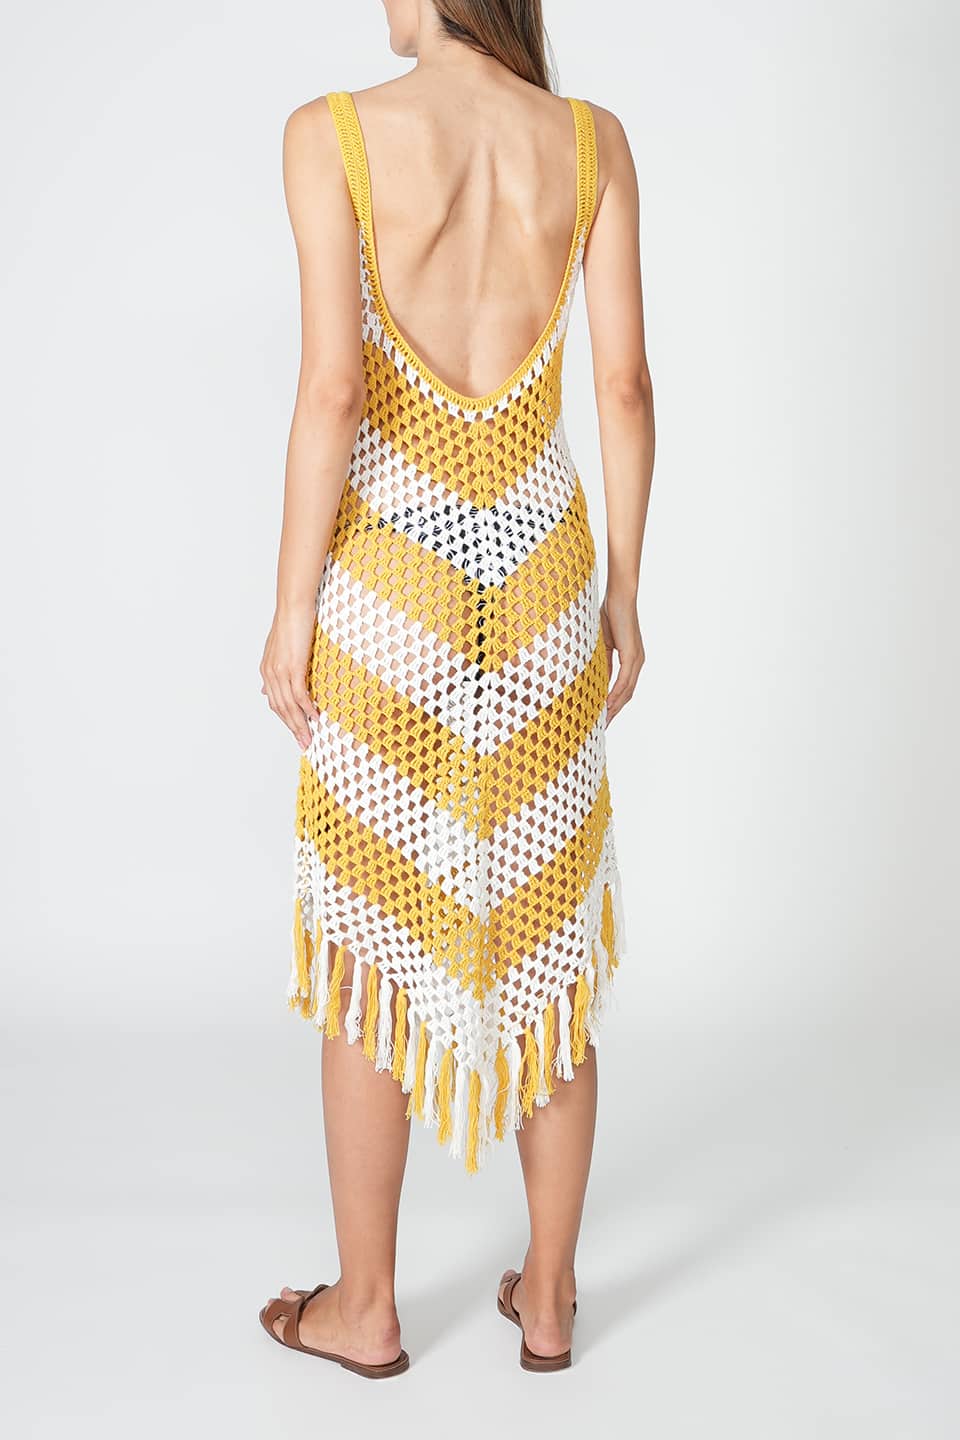 Thumbnail for Product gallery 5, Mellor Dress Yellow/White